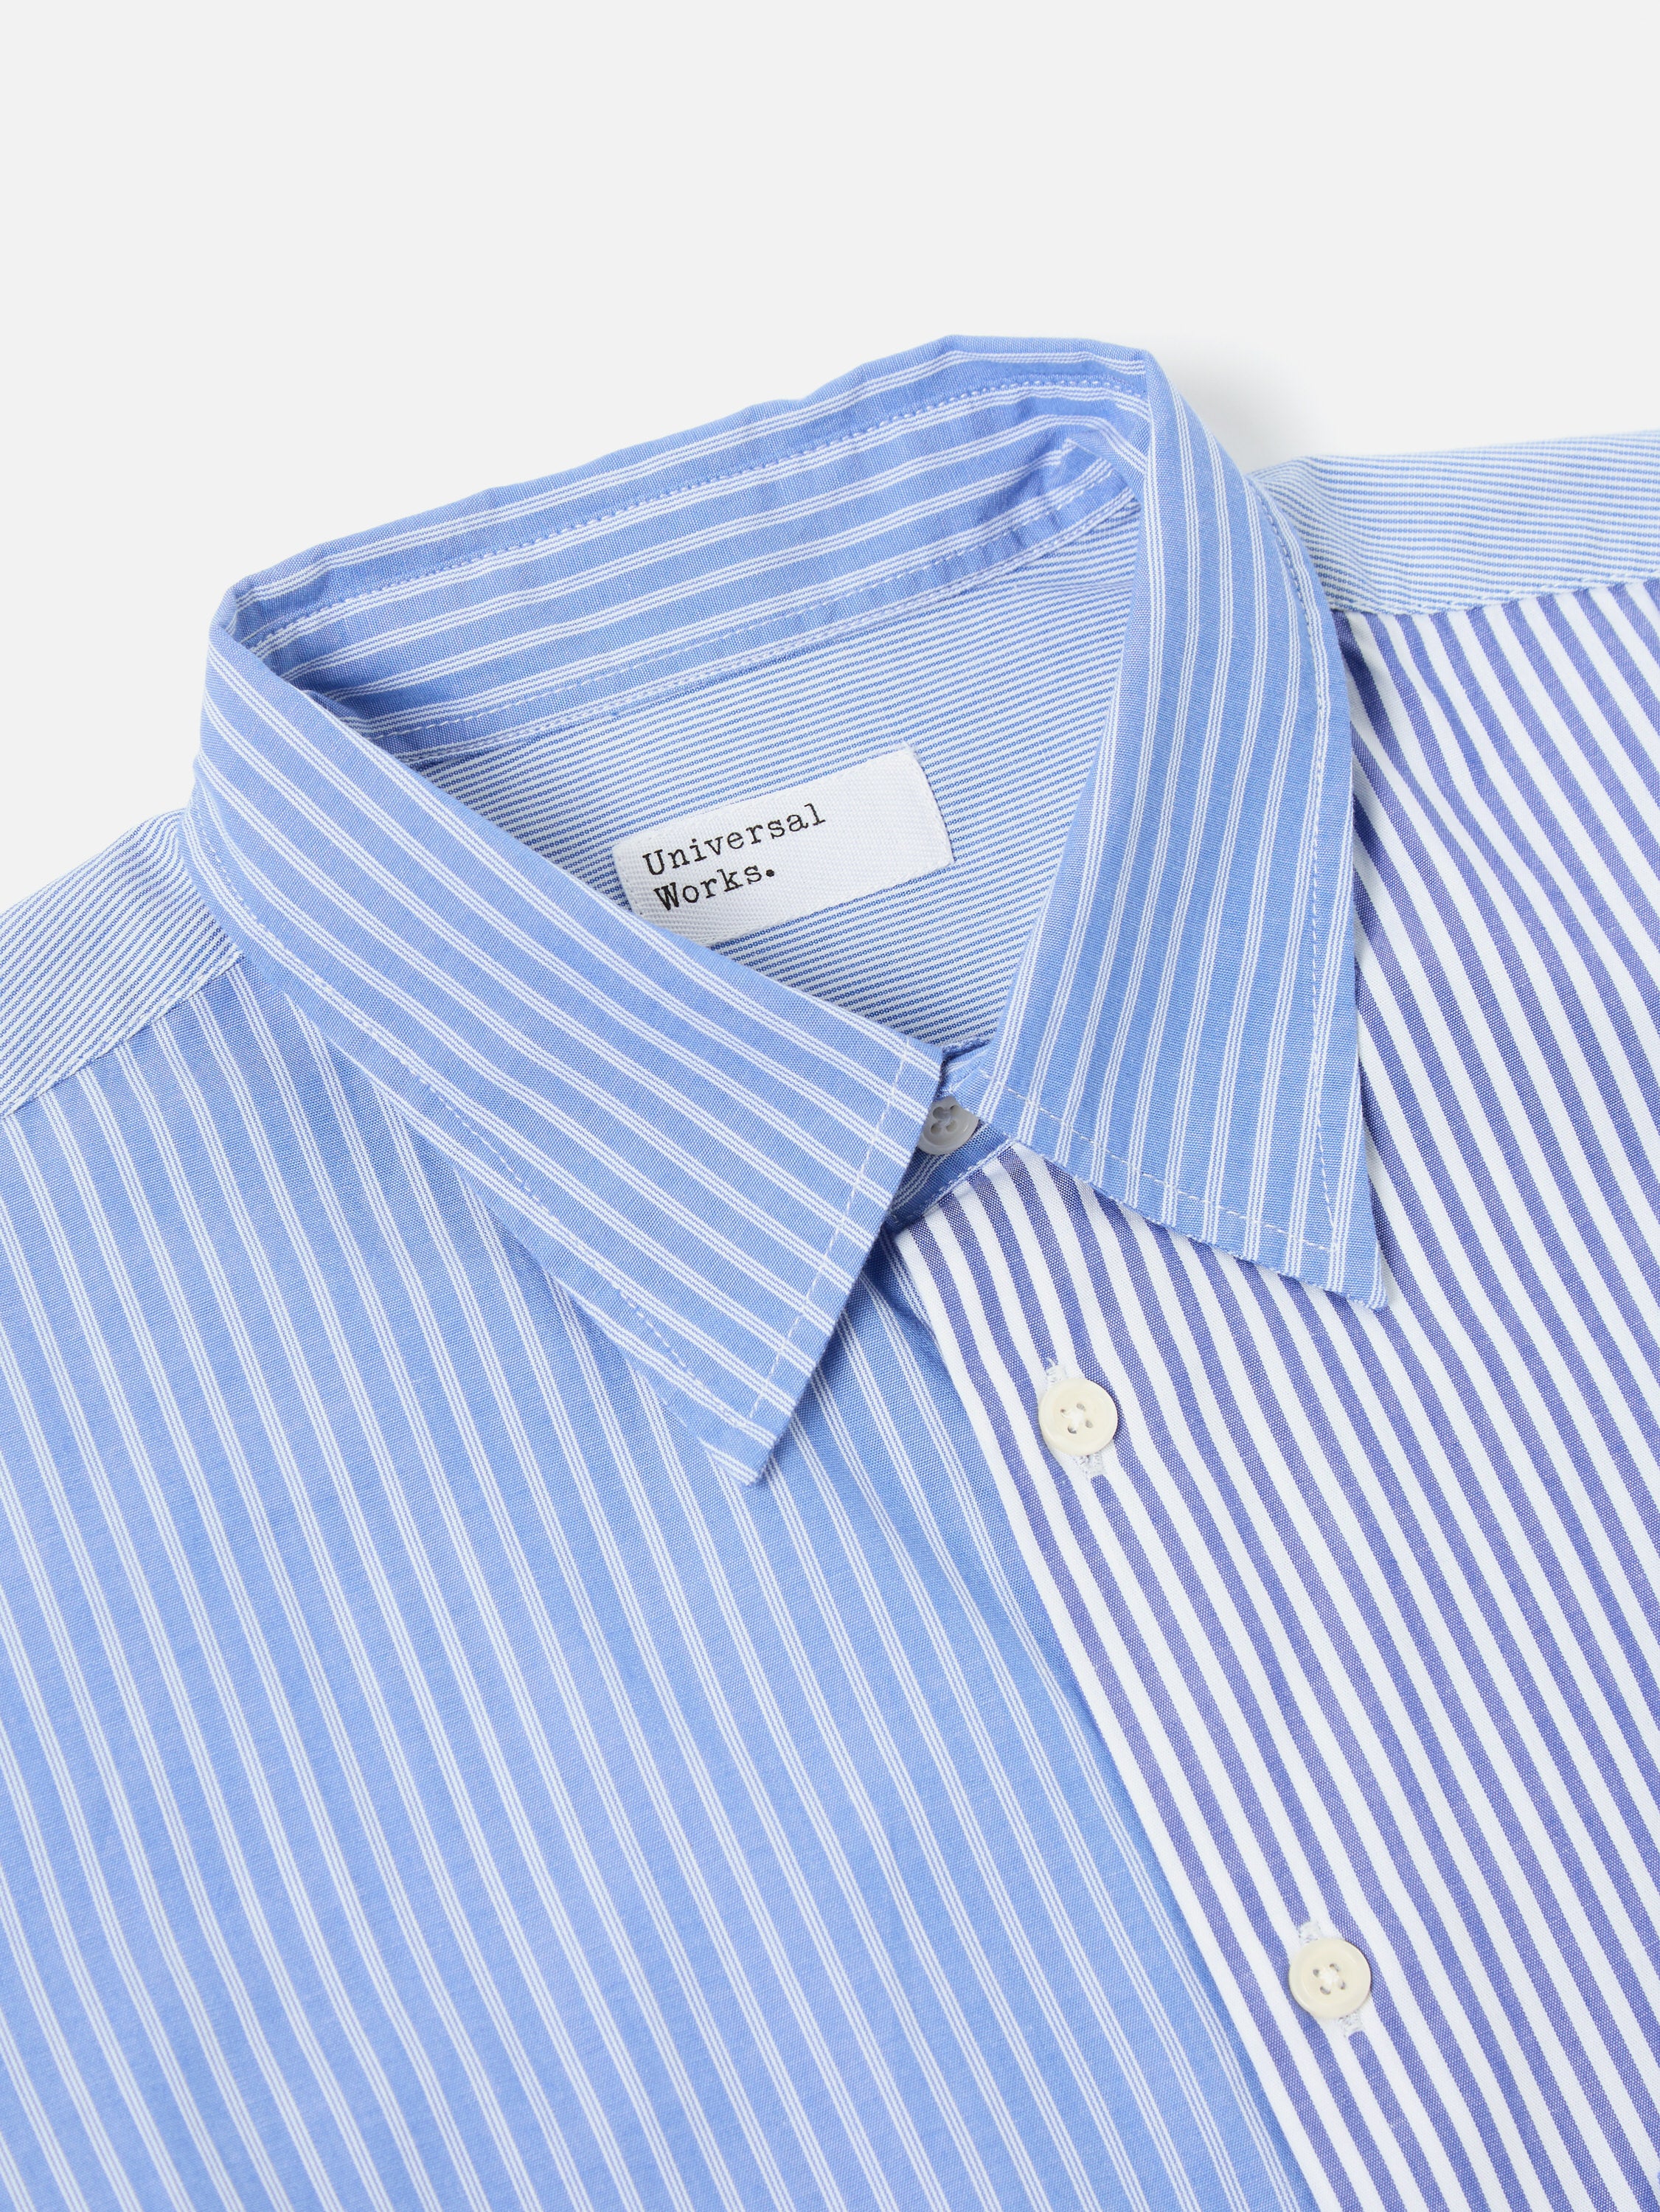 Universal Works Square Pocket Shirt in Blue/White Classic Principe Mix